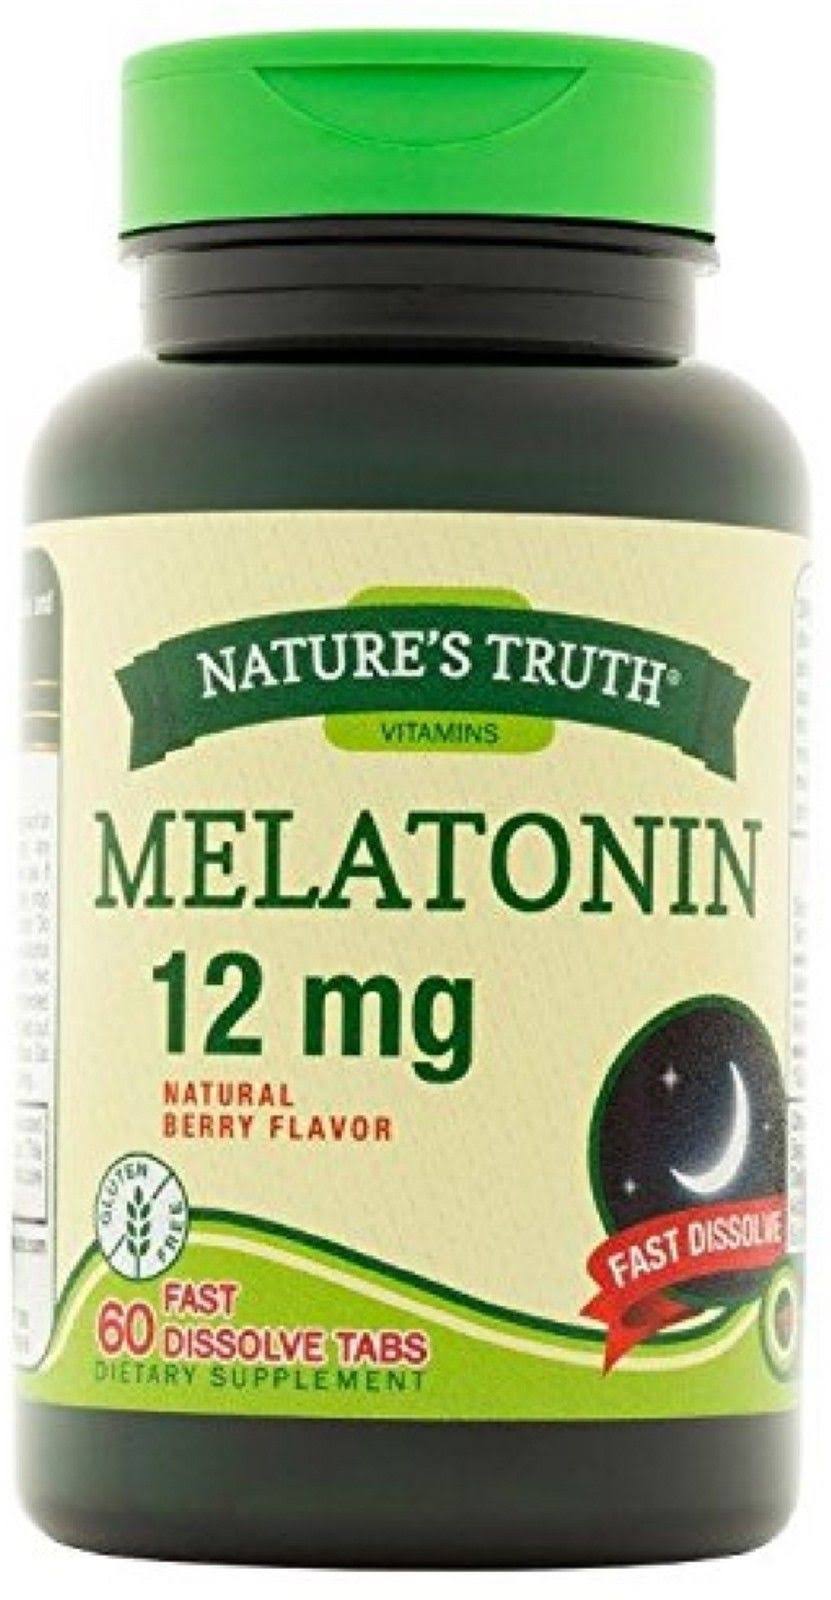 Nature's Truth Melatonin 12mg Dissolve Tablets - Natural Berry, x60